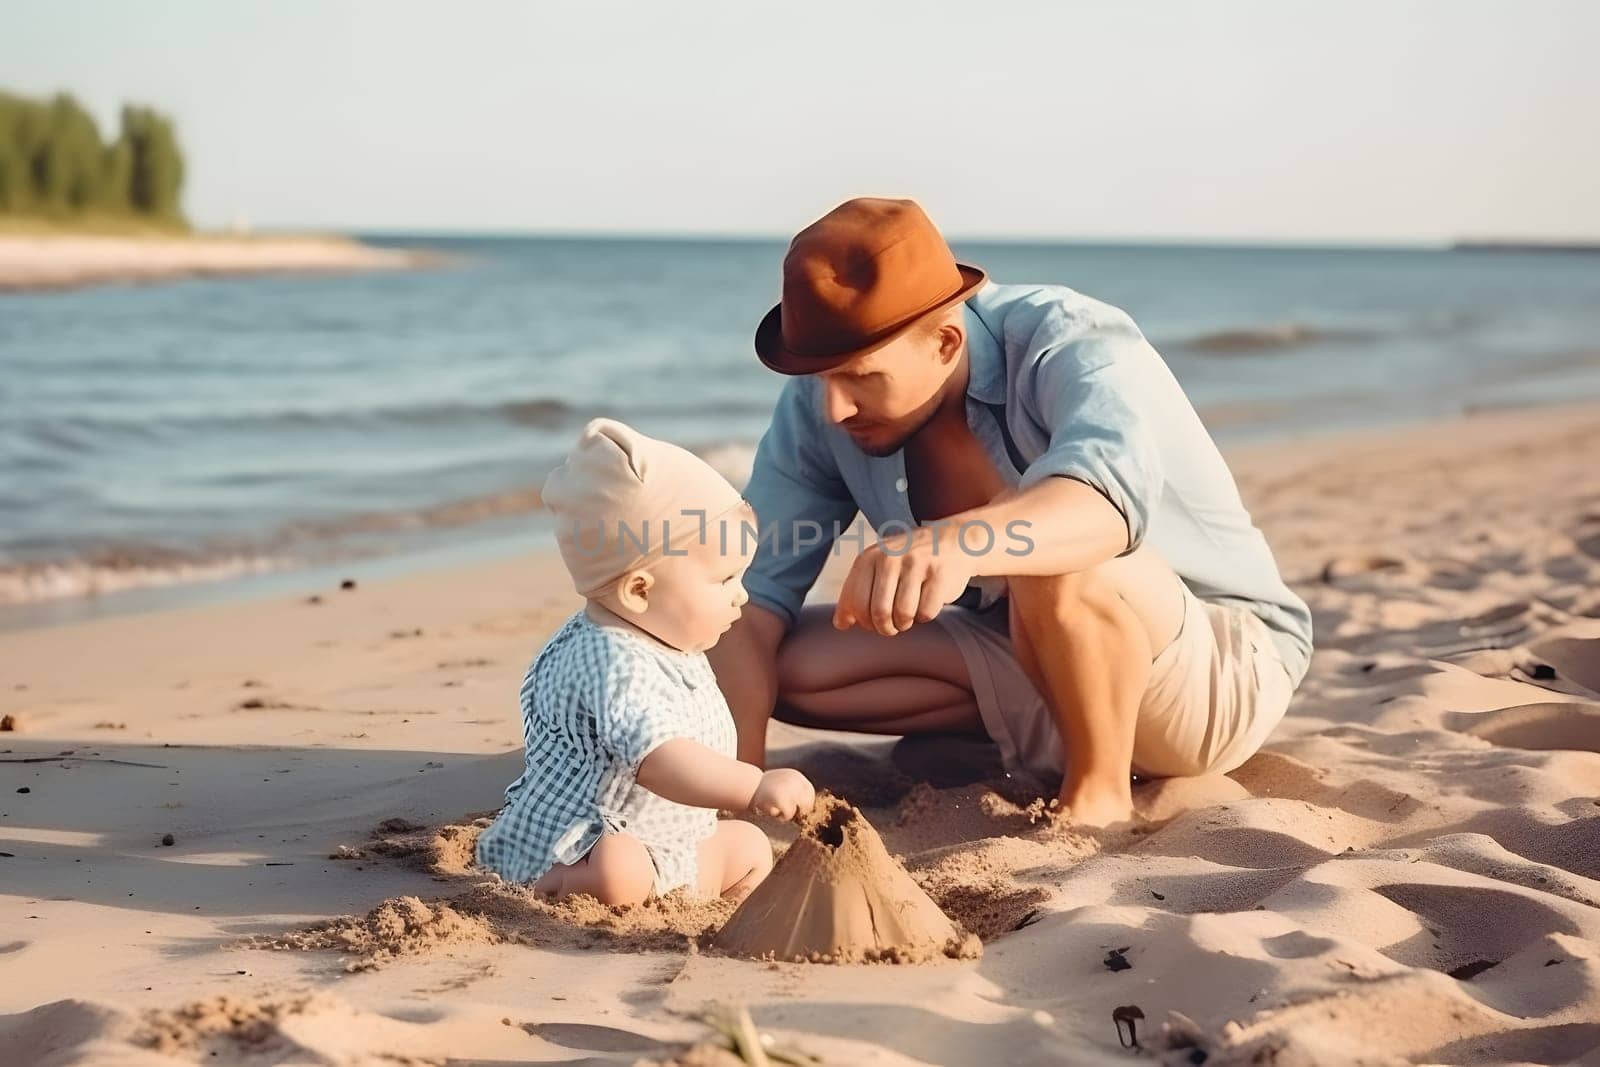 Fathers day. Dad and baby son playing together on sandy beach. Neural network generated in May 2023. Not based on any actual person, scene or pattern.